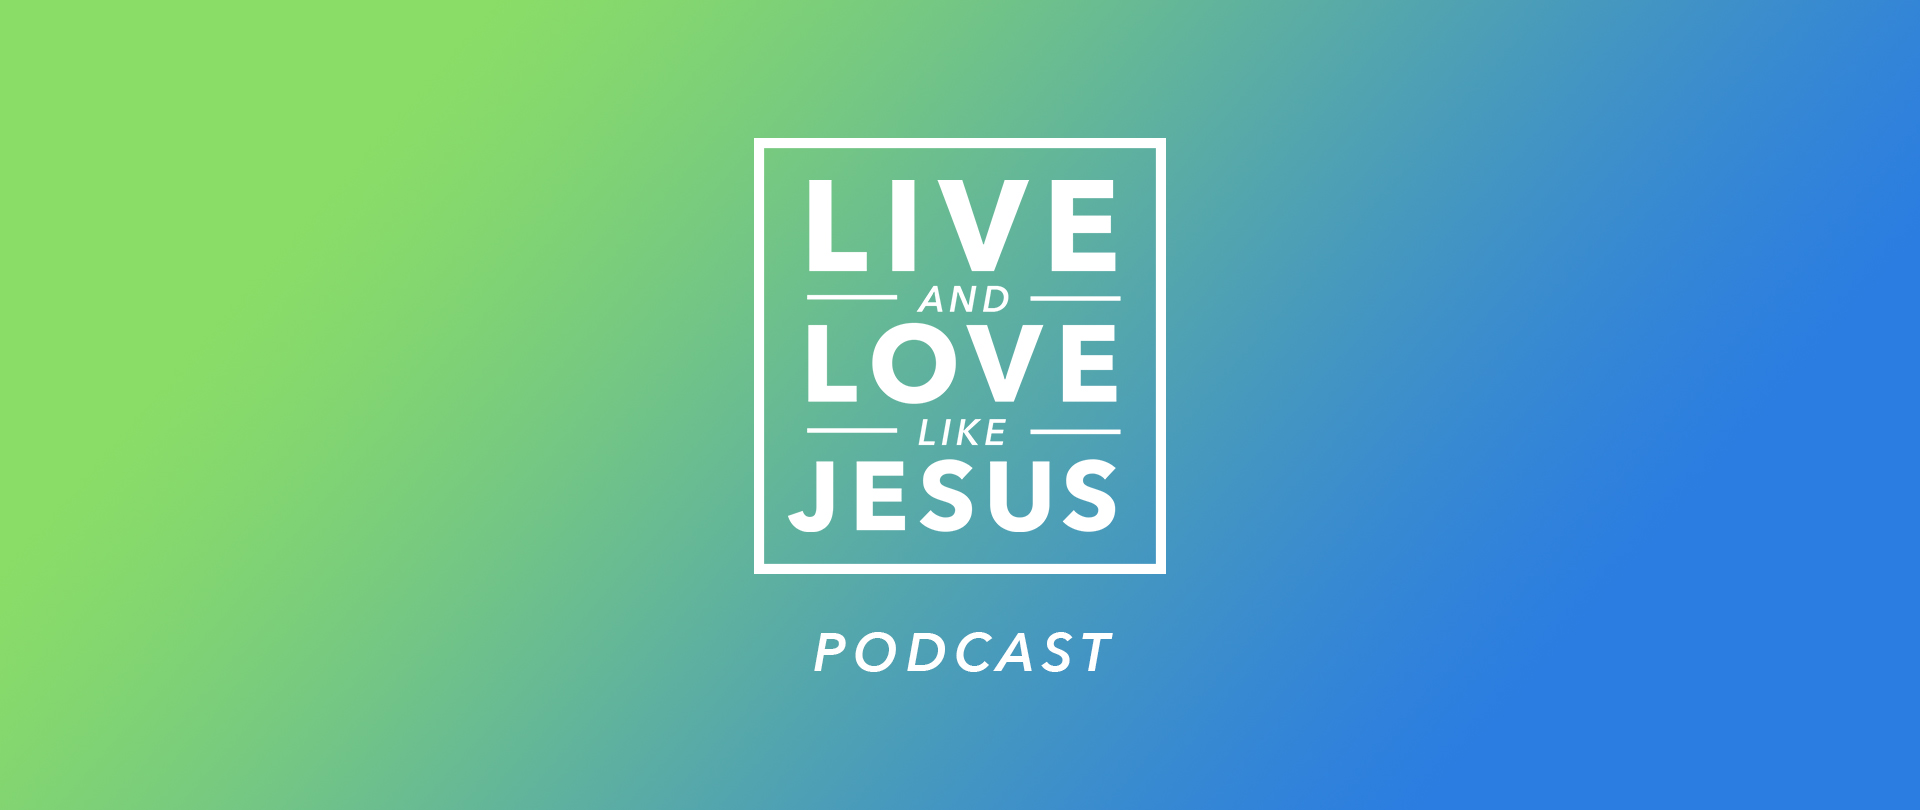 Live and Love Like Jesus Podcast

LISTEN IN AND LEARN TO LIVE AND LOVE LIKE JESUS.

Welcome to the Live and Love Like Jesus Podcast – where we talk about pursuing a lifestyle of complete dependence on God, how to grow and multiply yourself, and how to demonstrate the good news of Jesus.
